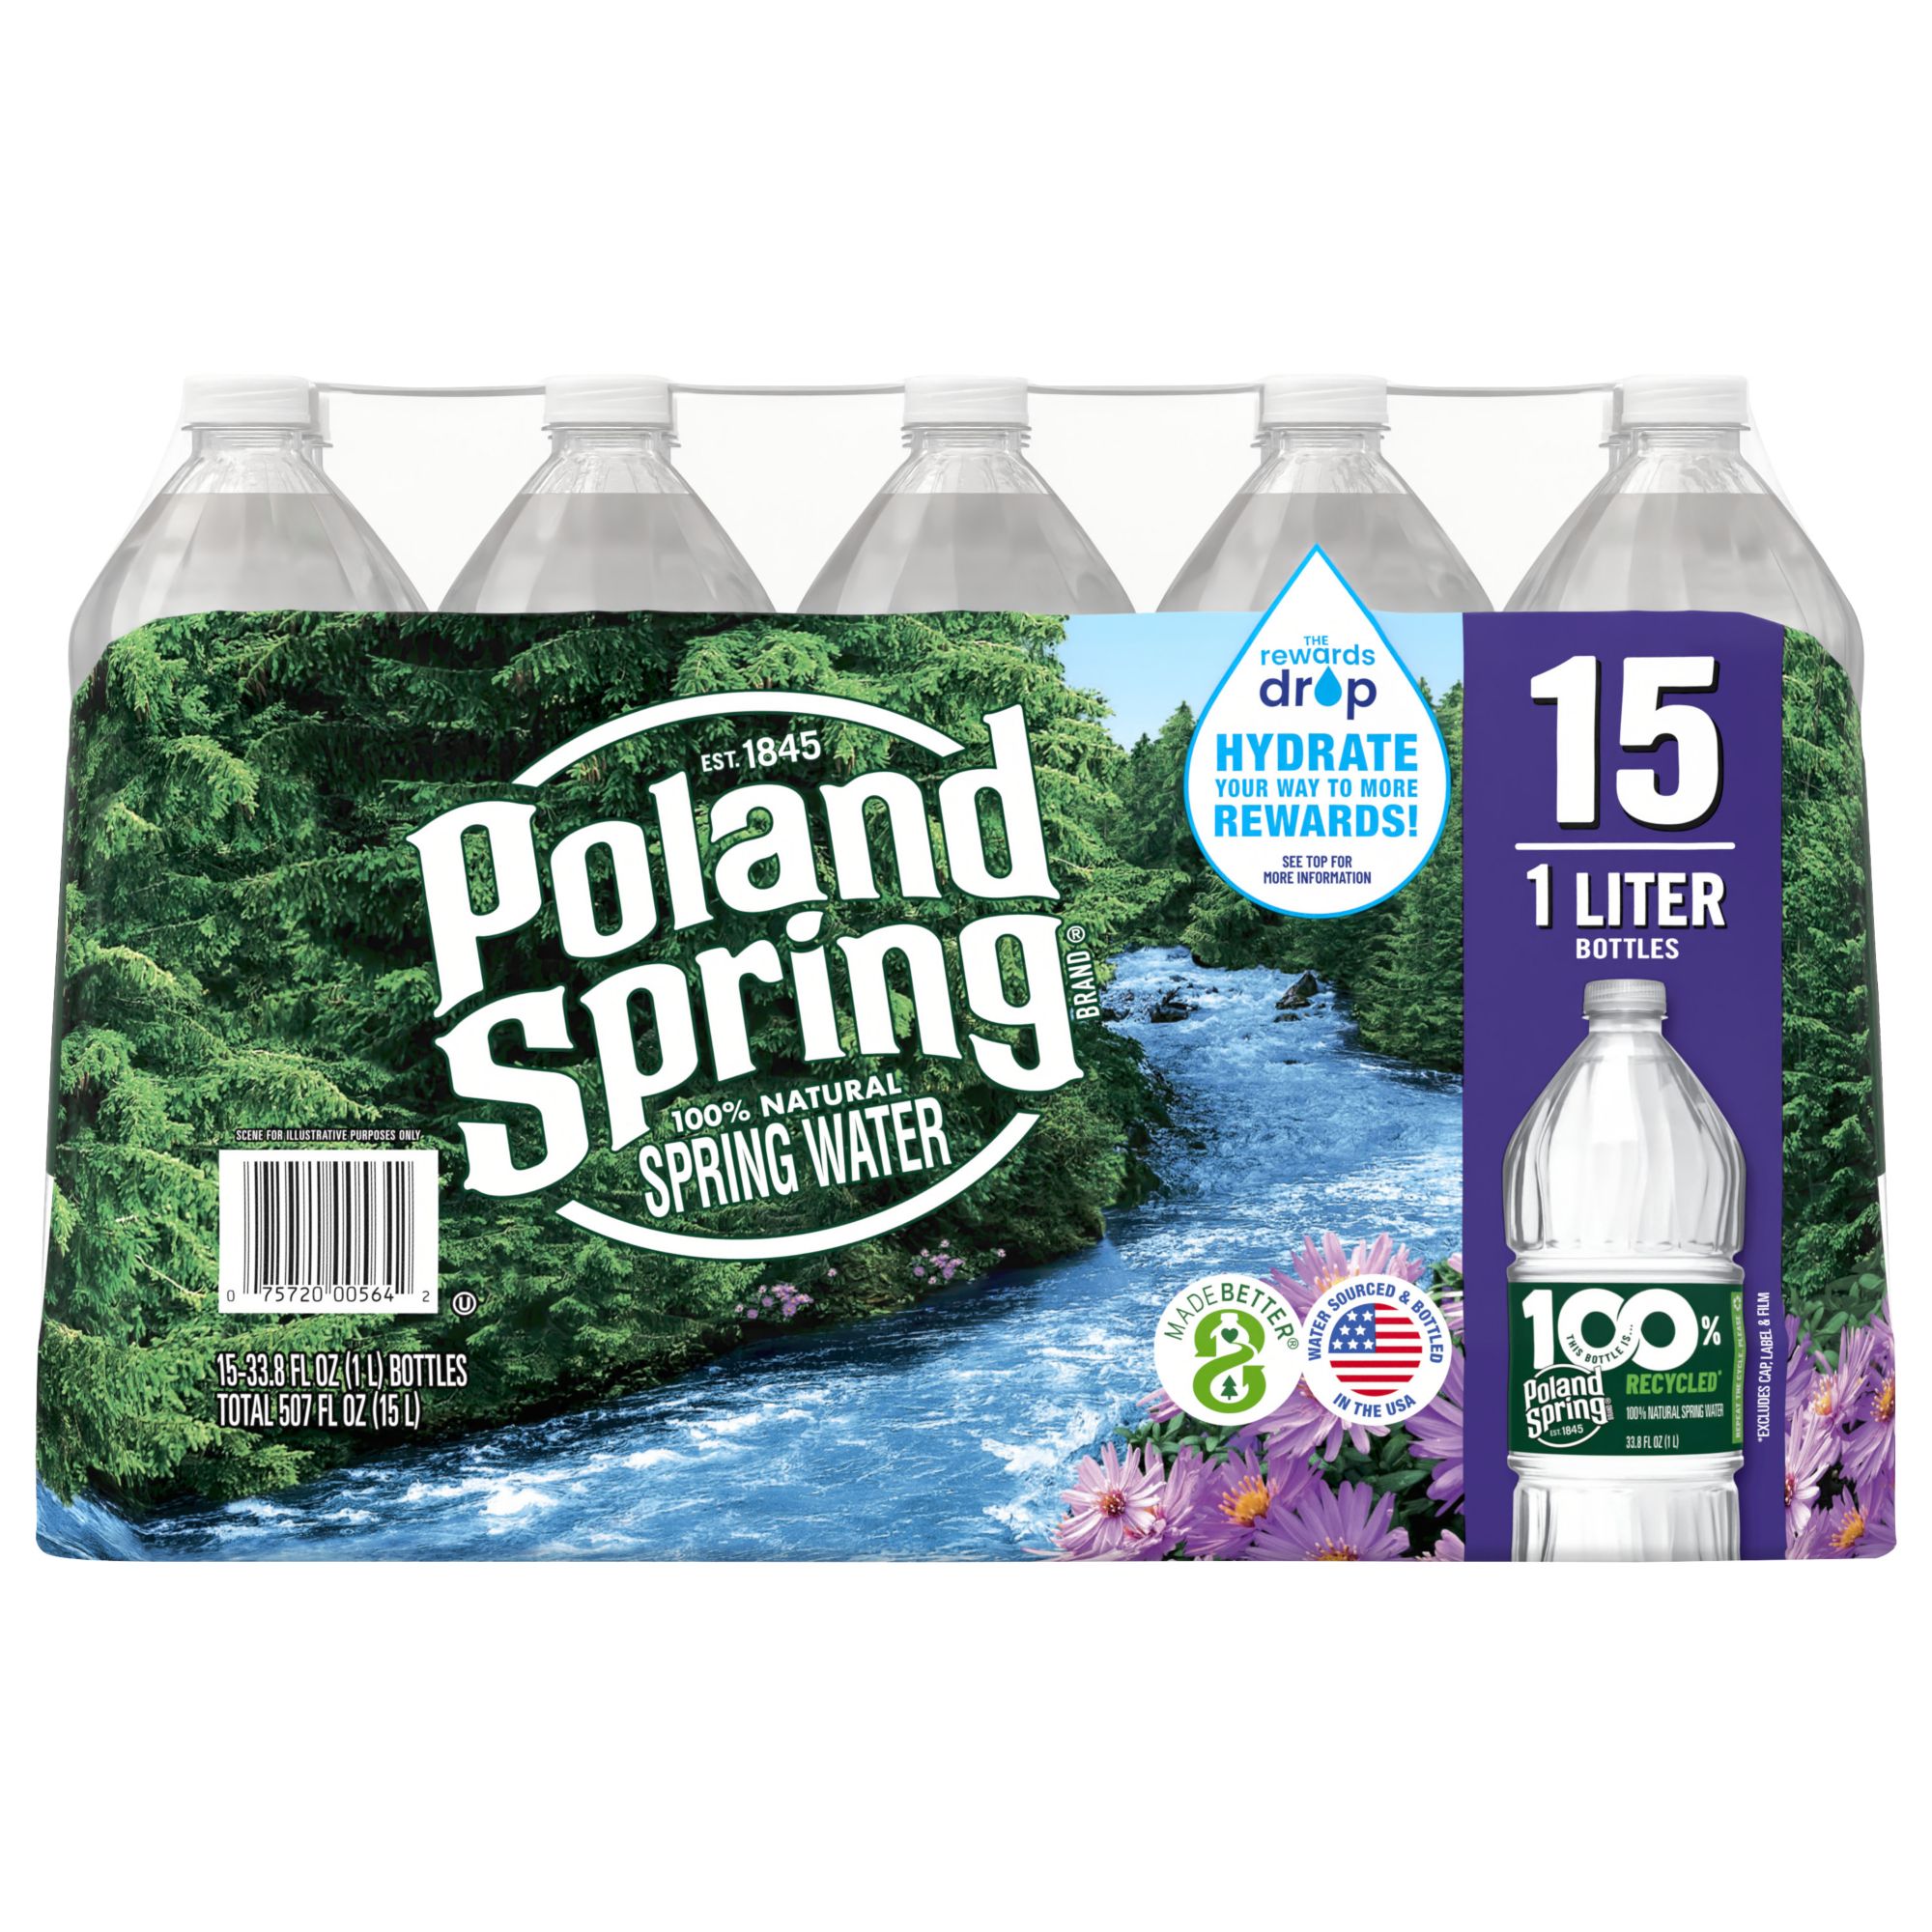 Poland Spring Natural Spring Water Clear Jugs (3 Liter)